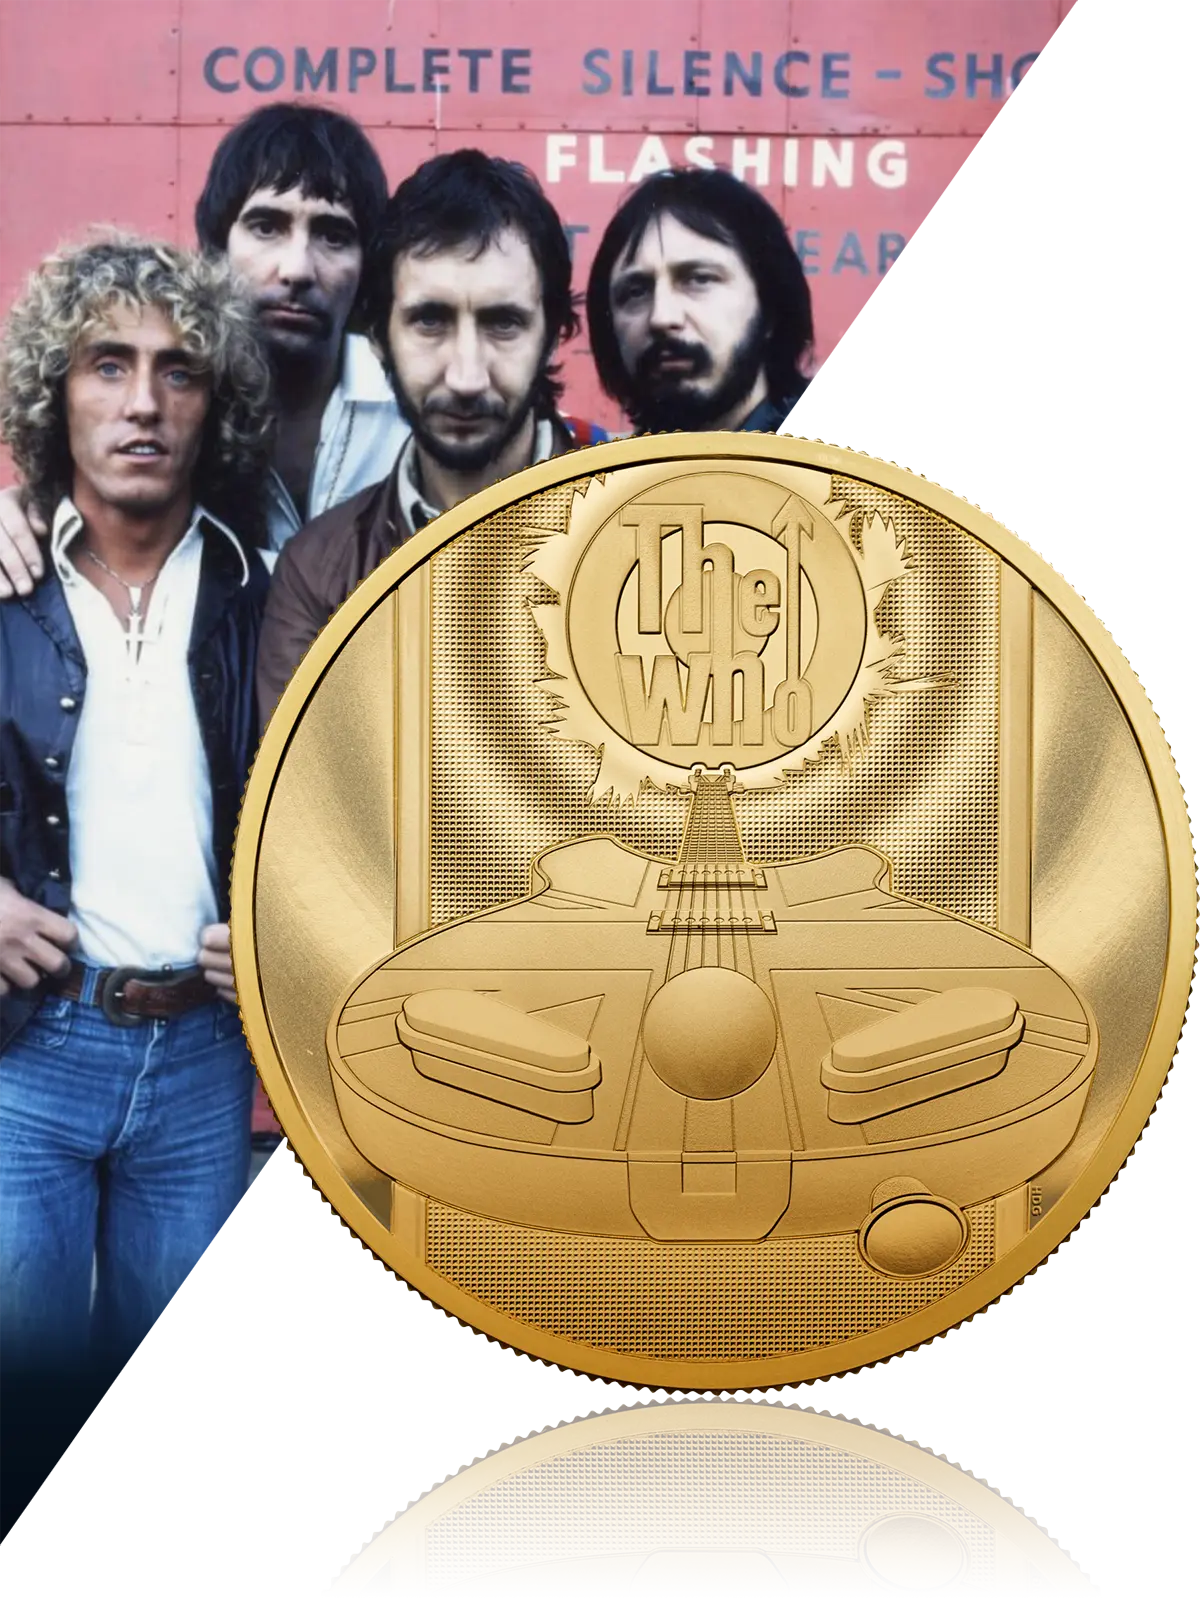 The who